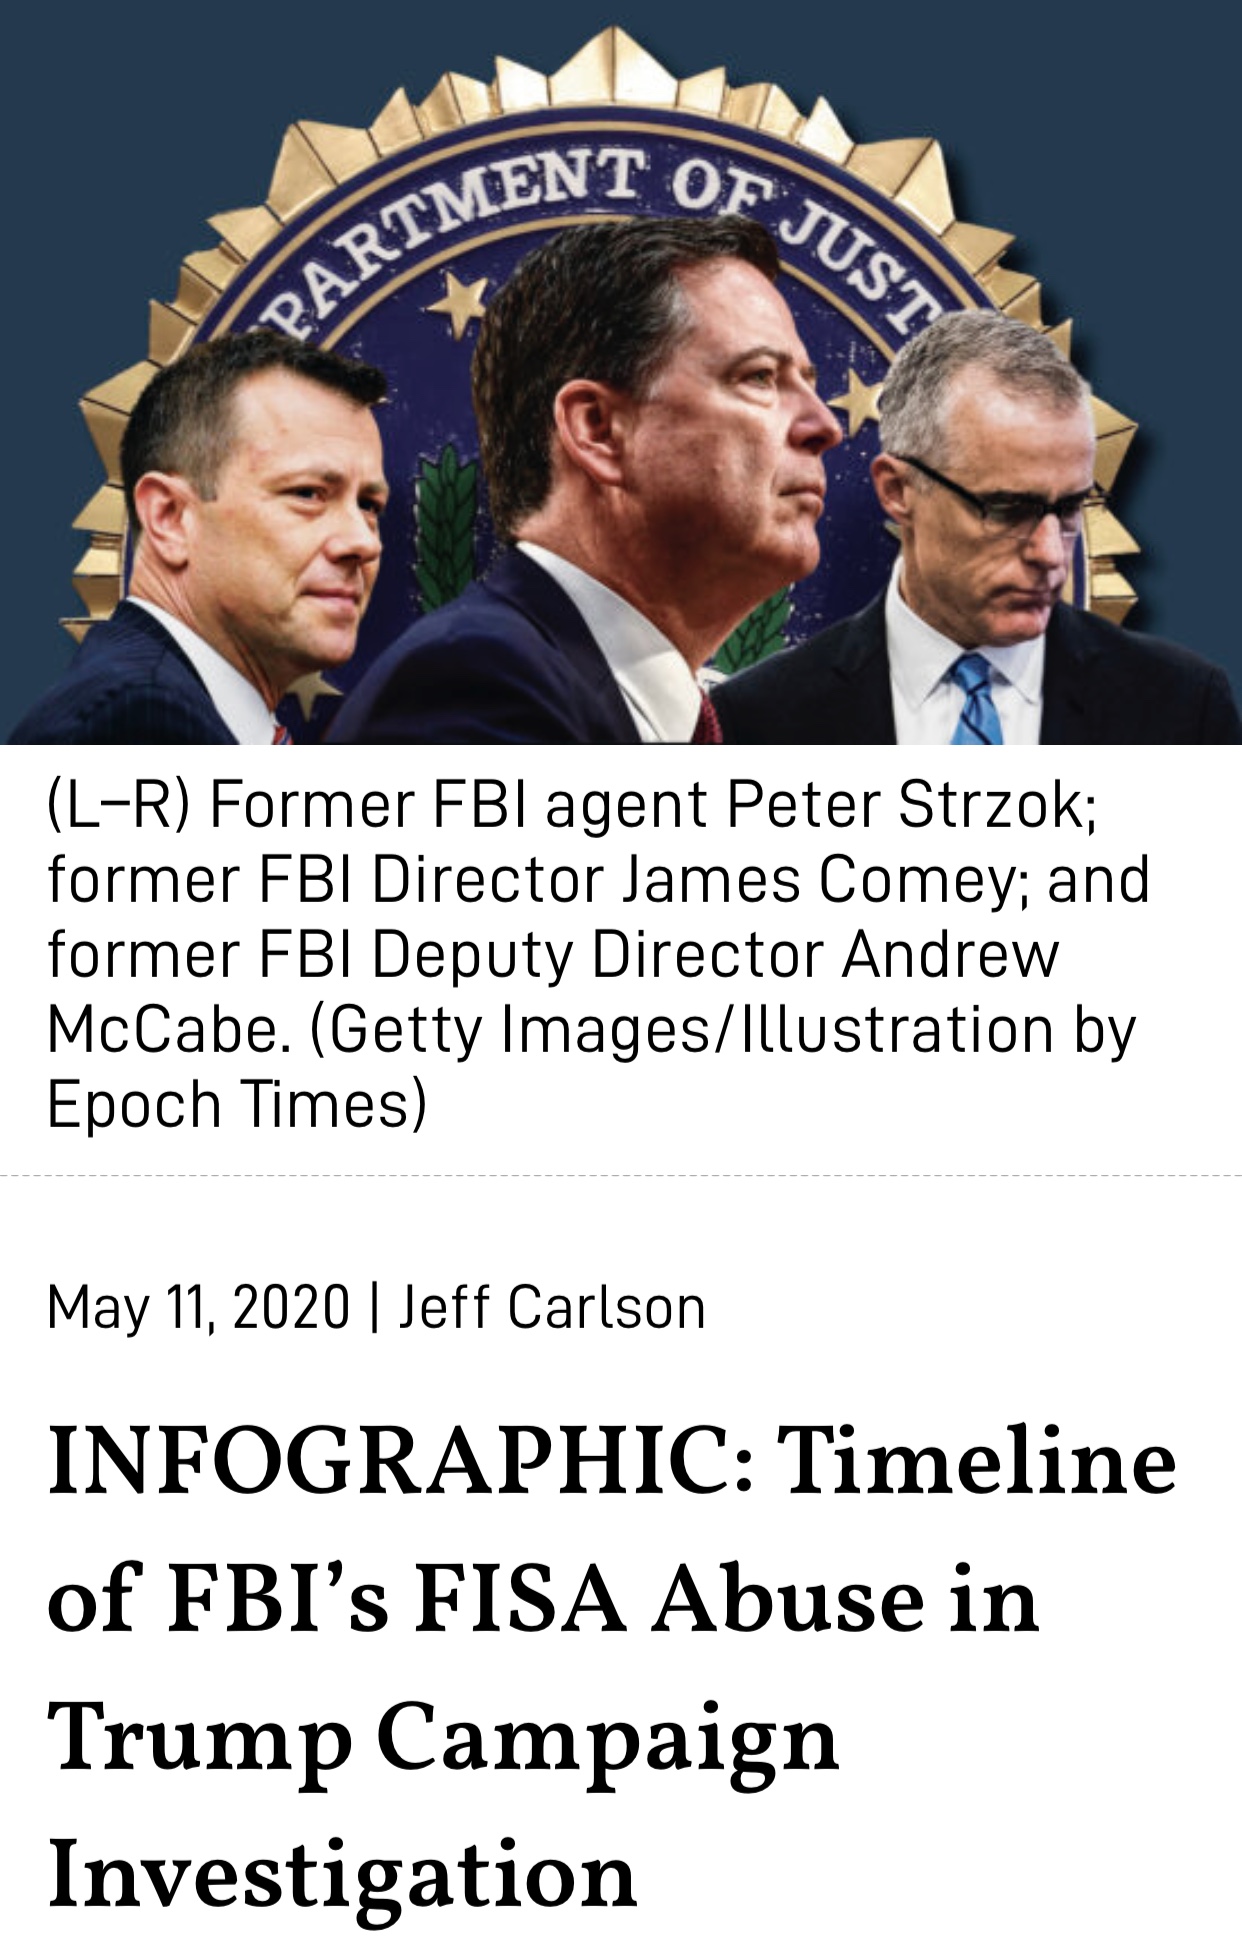 INFOGRAPHIC: Timeline of FBI’s FISA Abuse in Trump Campaign Investigation